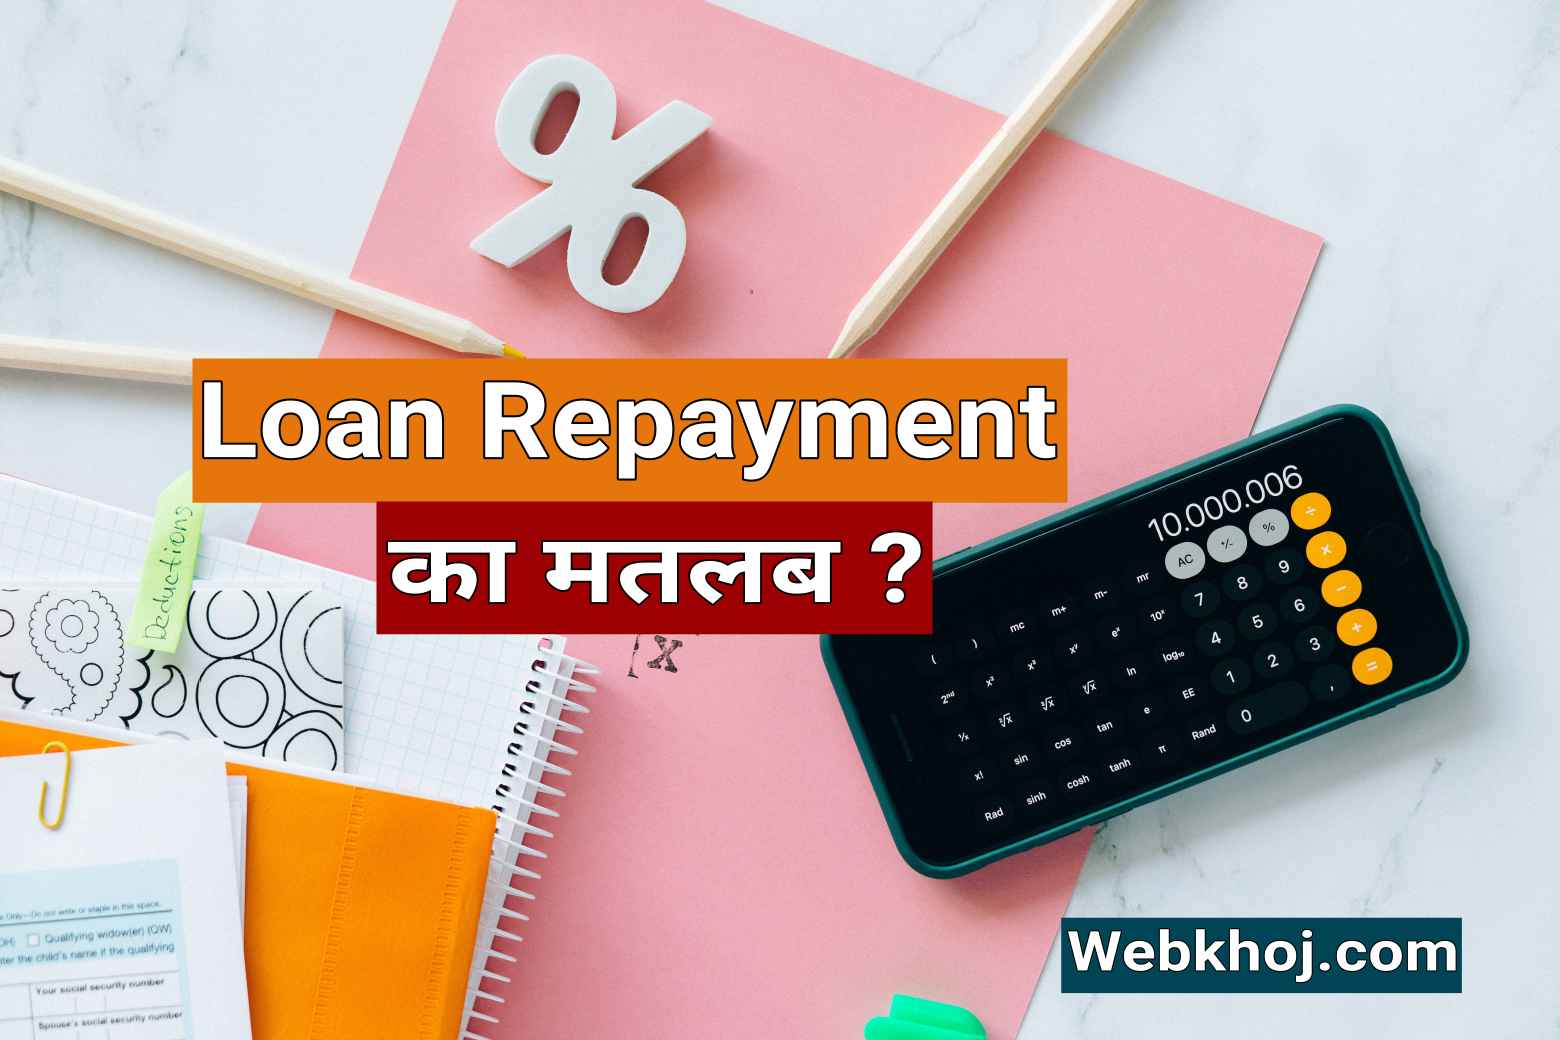 Loan repayment meaning in hindi